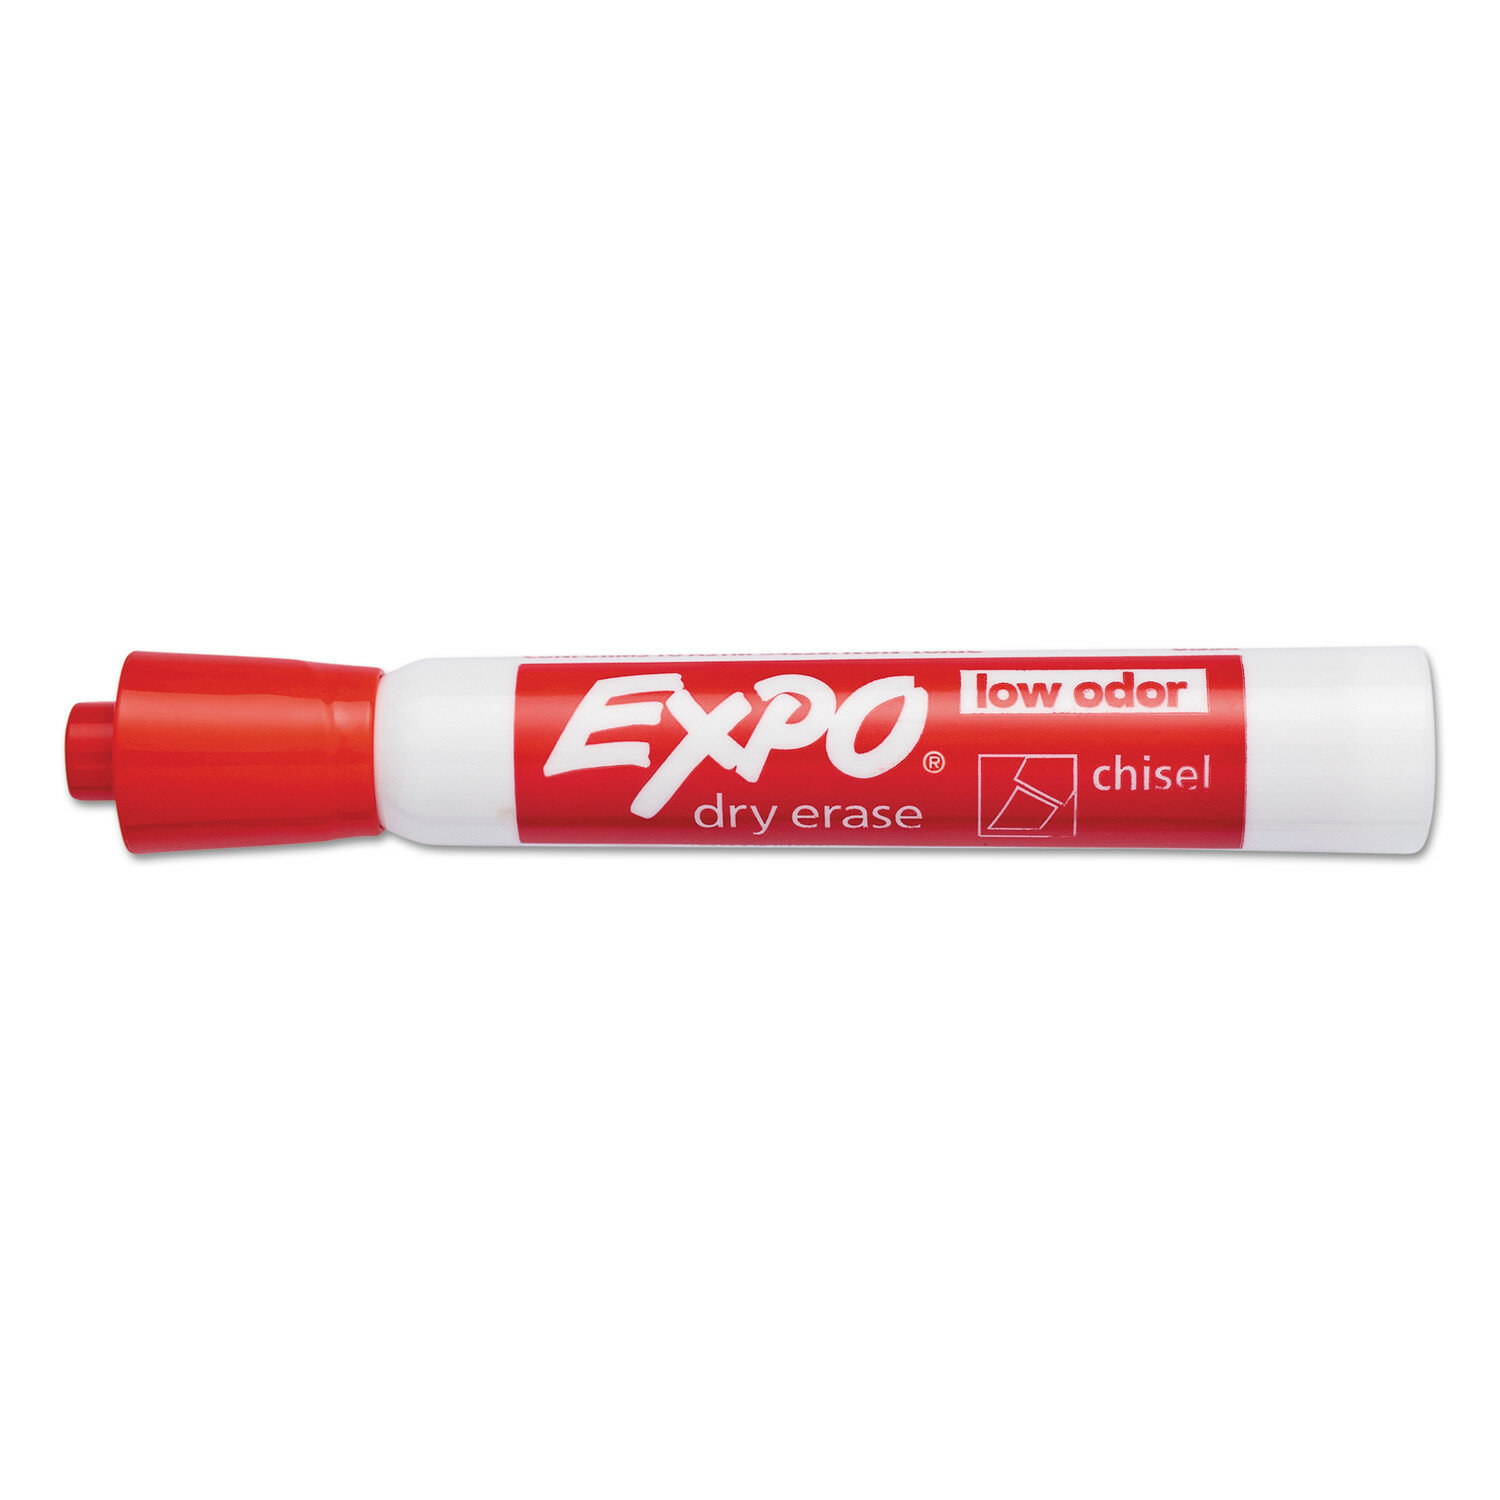 Buy Expo® Broad Chisel Tip Dry Erase Markers (Set of 12) at S&S